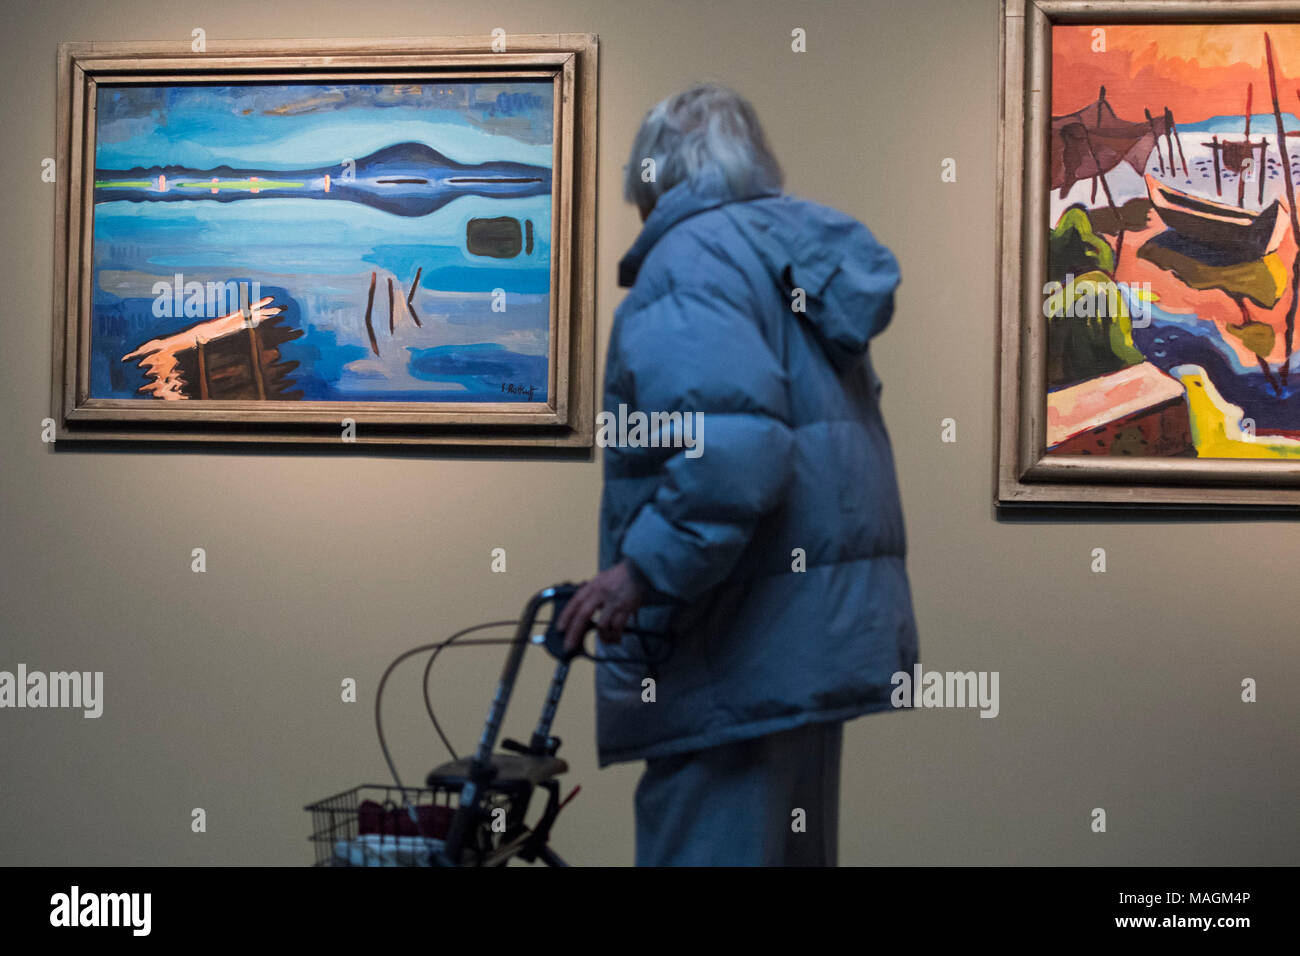 ILLUSTRATION - 16 March 2018, Germany, Hamburg: An elderly woman with rollator looks at the paintings 'Spiegelnder See' (L, 1936) (lit. reflective lake) by Karl Schmidt-Rottluff at the Bucerius Arts Forum in Hamburg. The Hamburg museum Bucerius Arts Forum offers guided exhibition tours particularly for dementia patients. Photo: Malte Christians/dpa Stock Photo